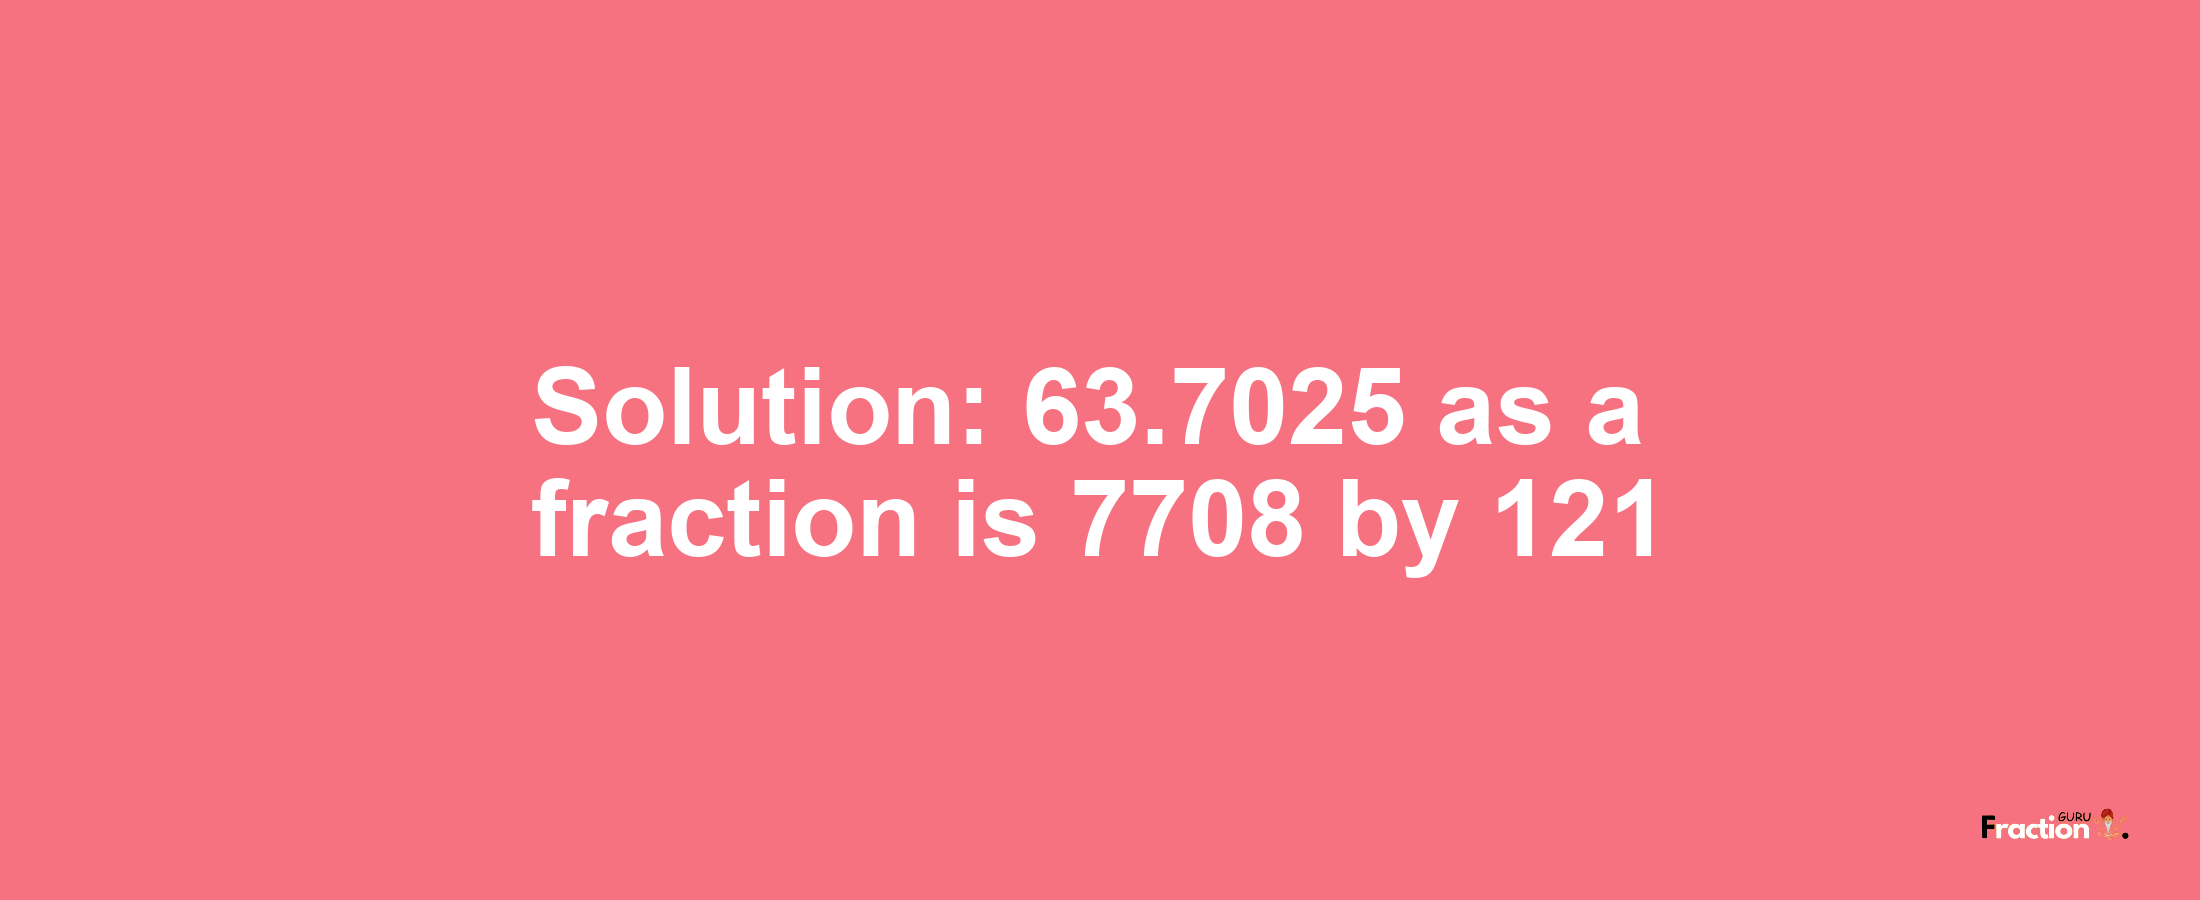 Solution:63.7025 as a fraction is 7708/121